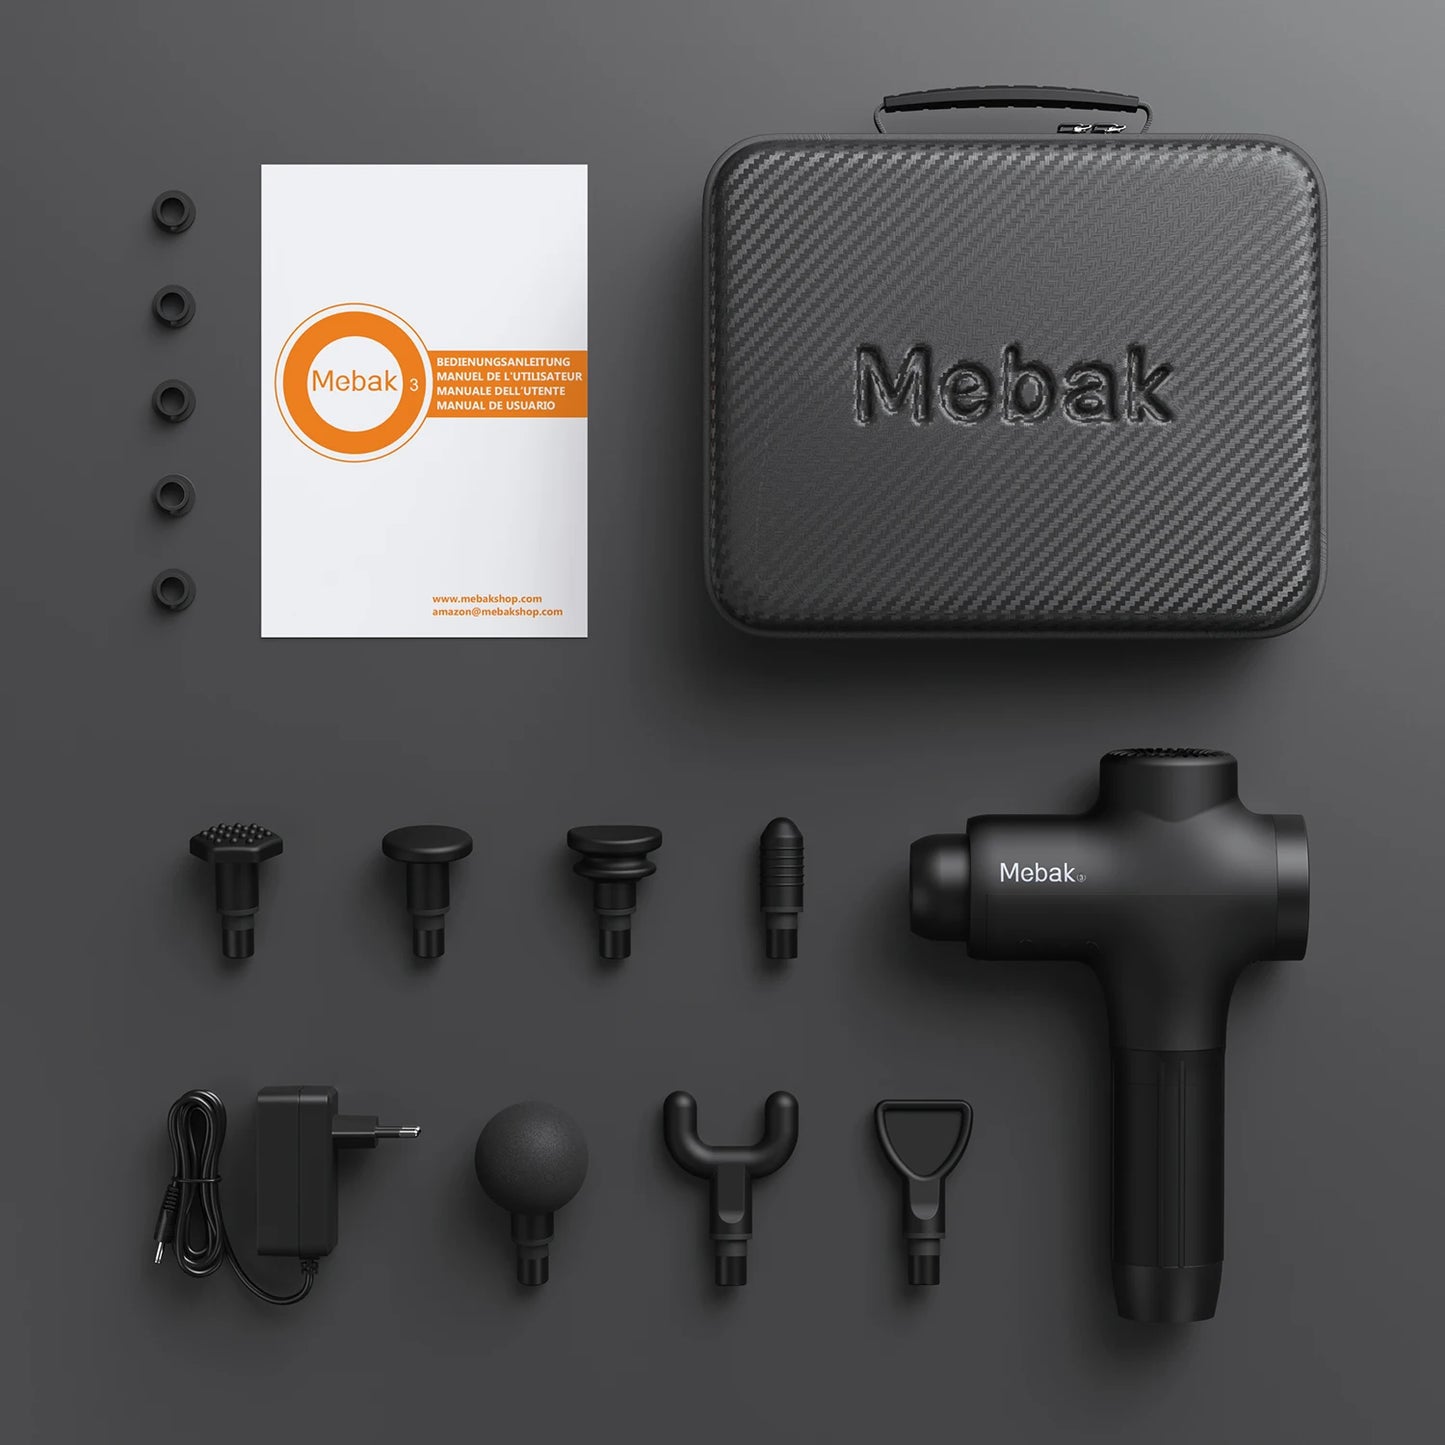 Mebak 3 Massage Gun For Muscle Pain Relief, Relaxation, Recovery